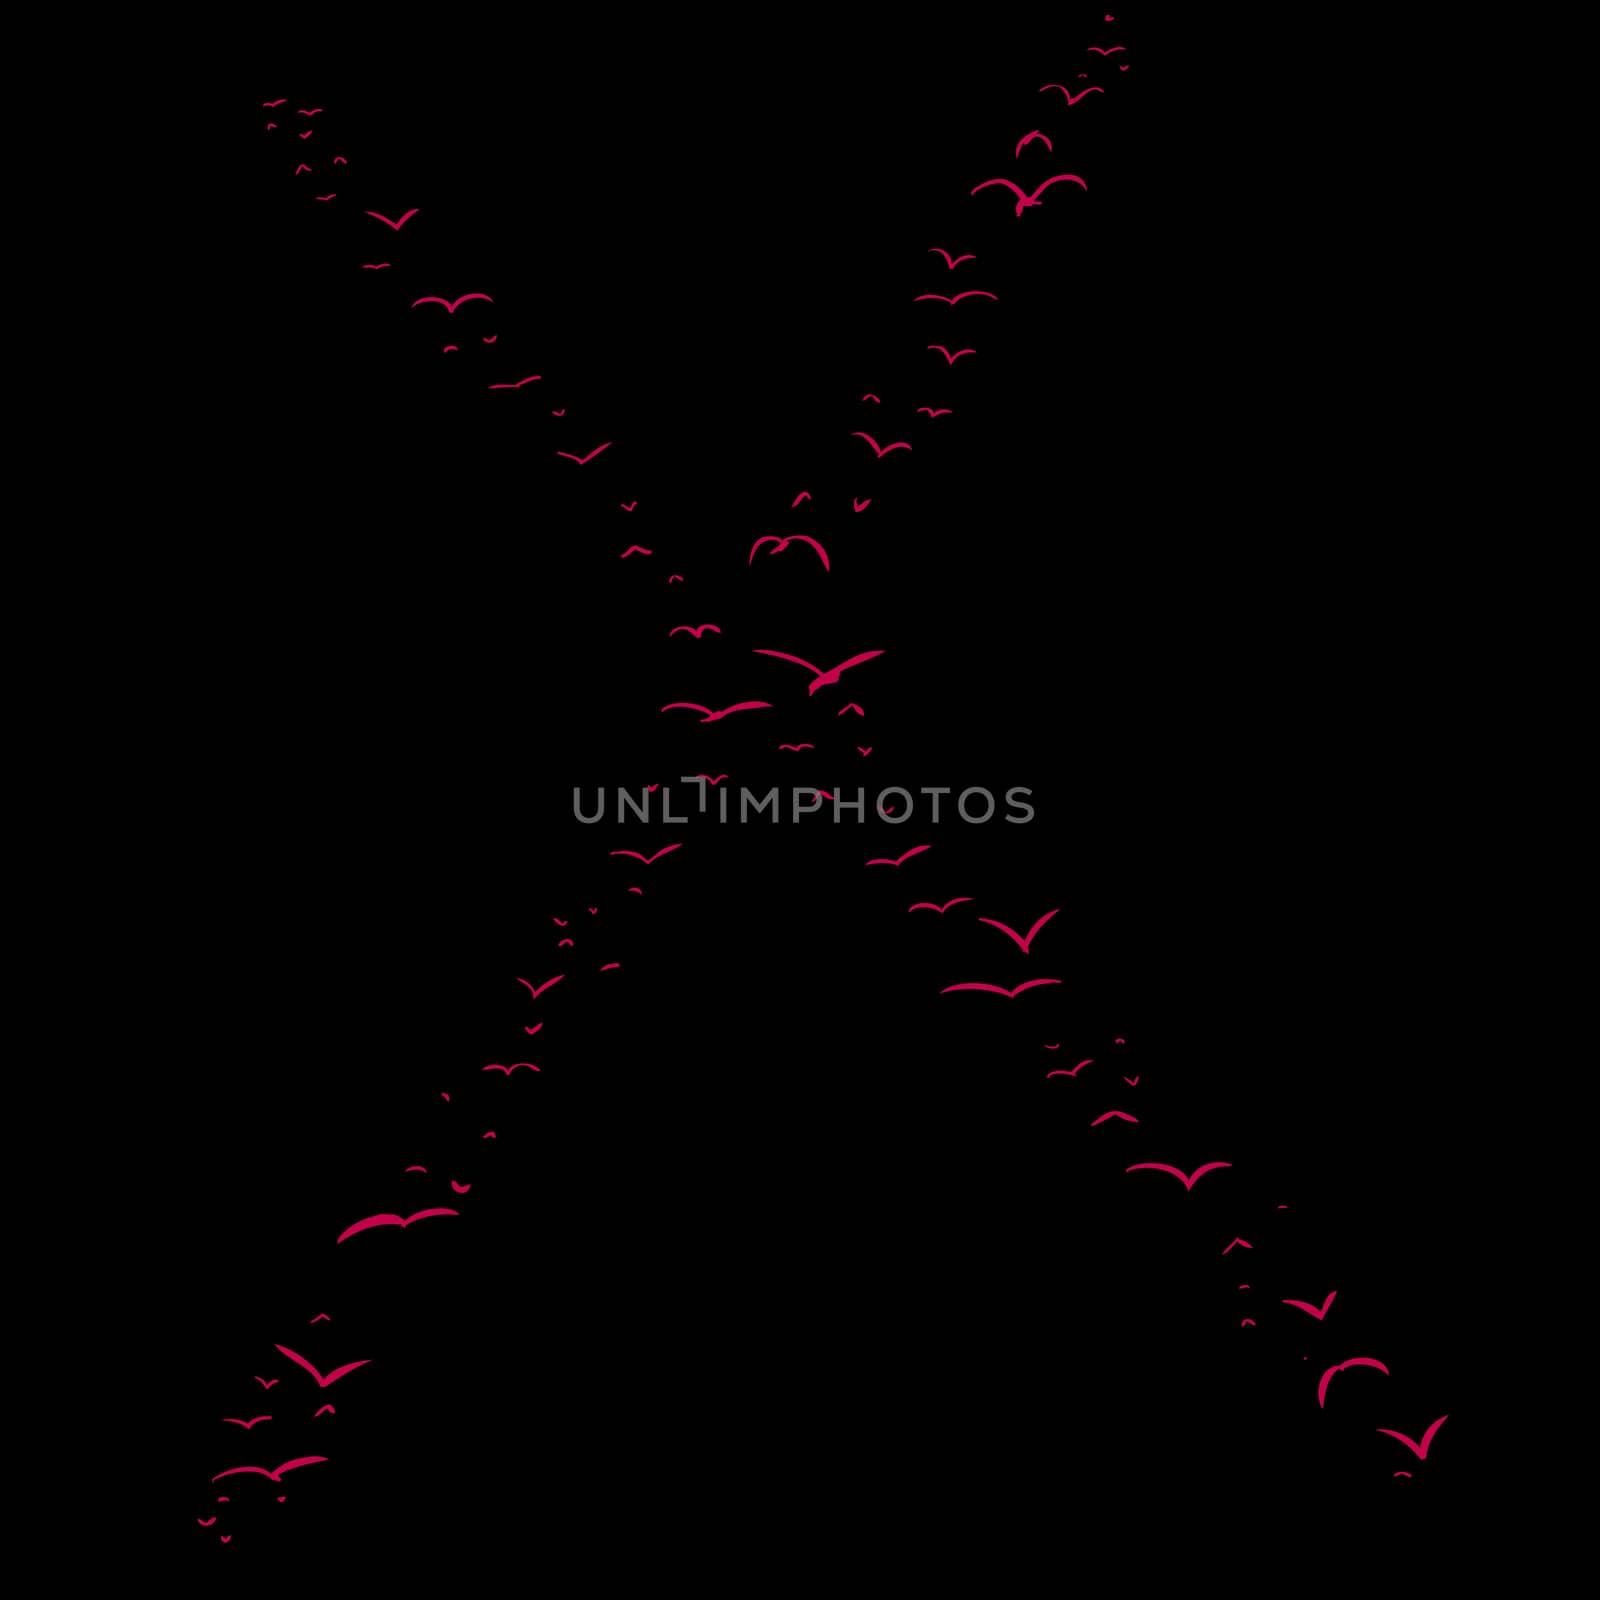 Illustration of a flock of birds in the shape of the letter x